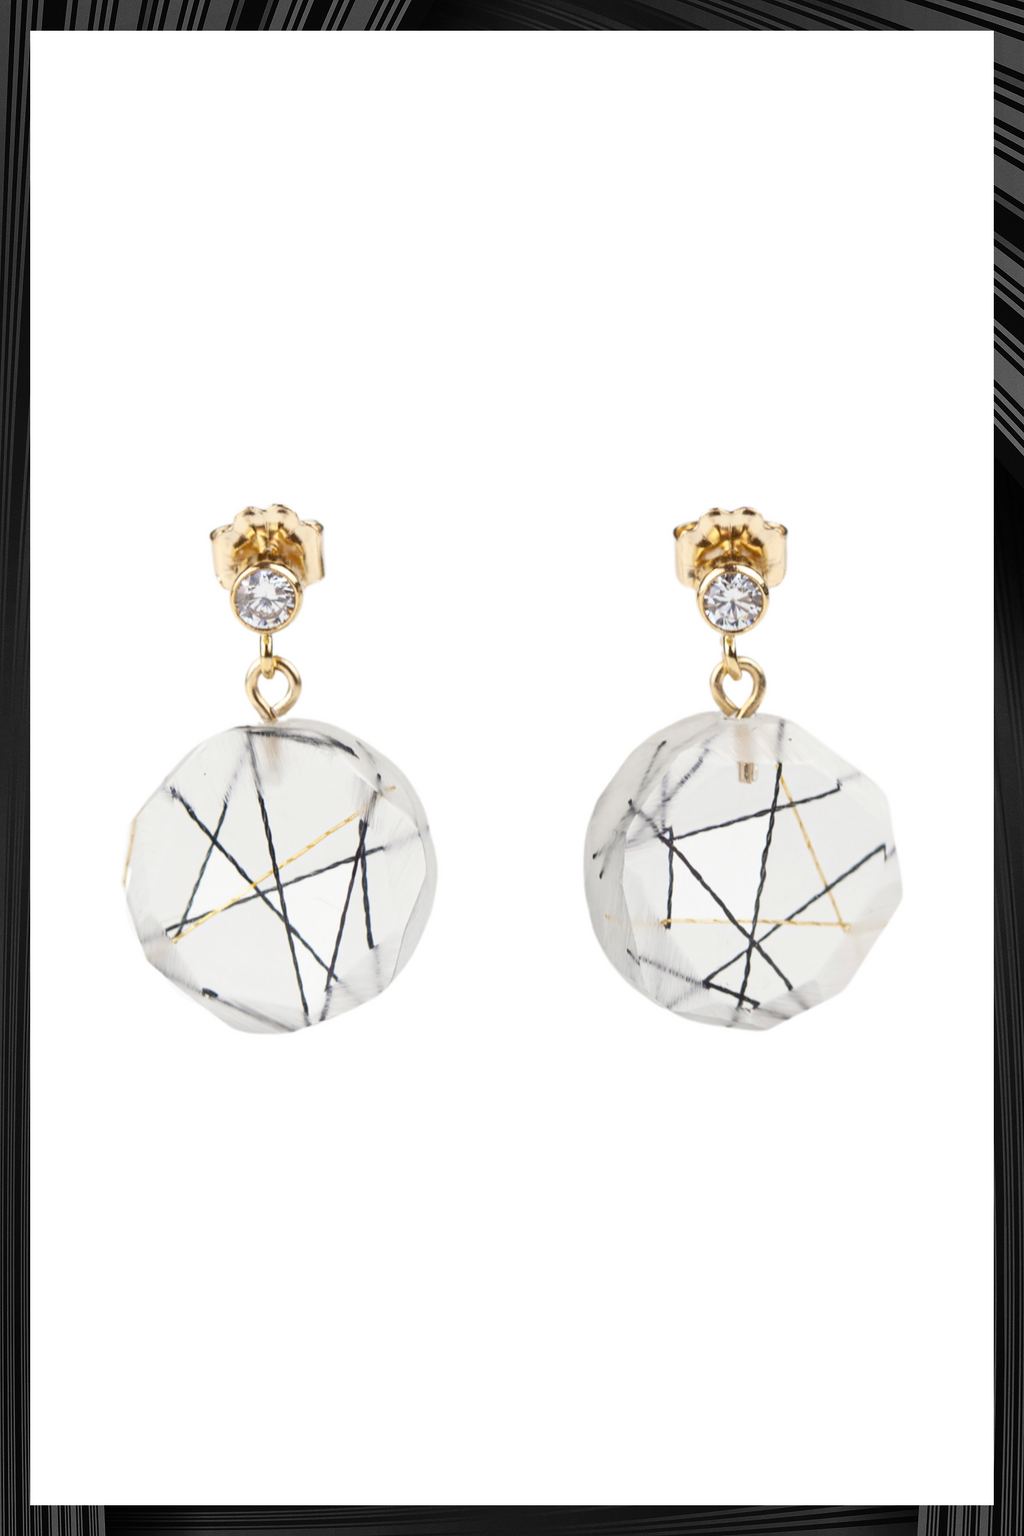 Cubic Zirconia Round Resin Drop Earrings | Free Delivery - Quick Shipping